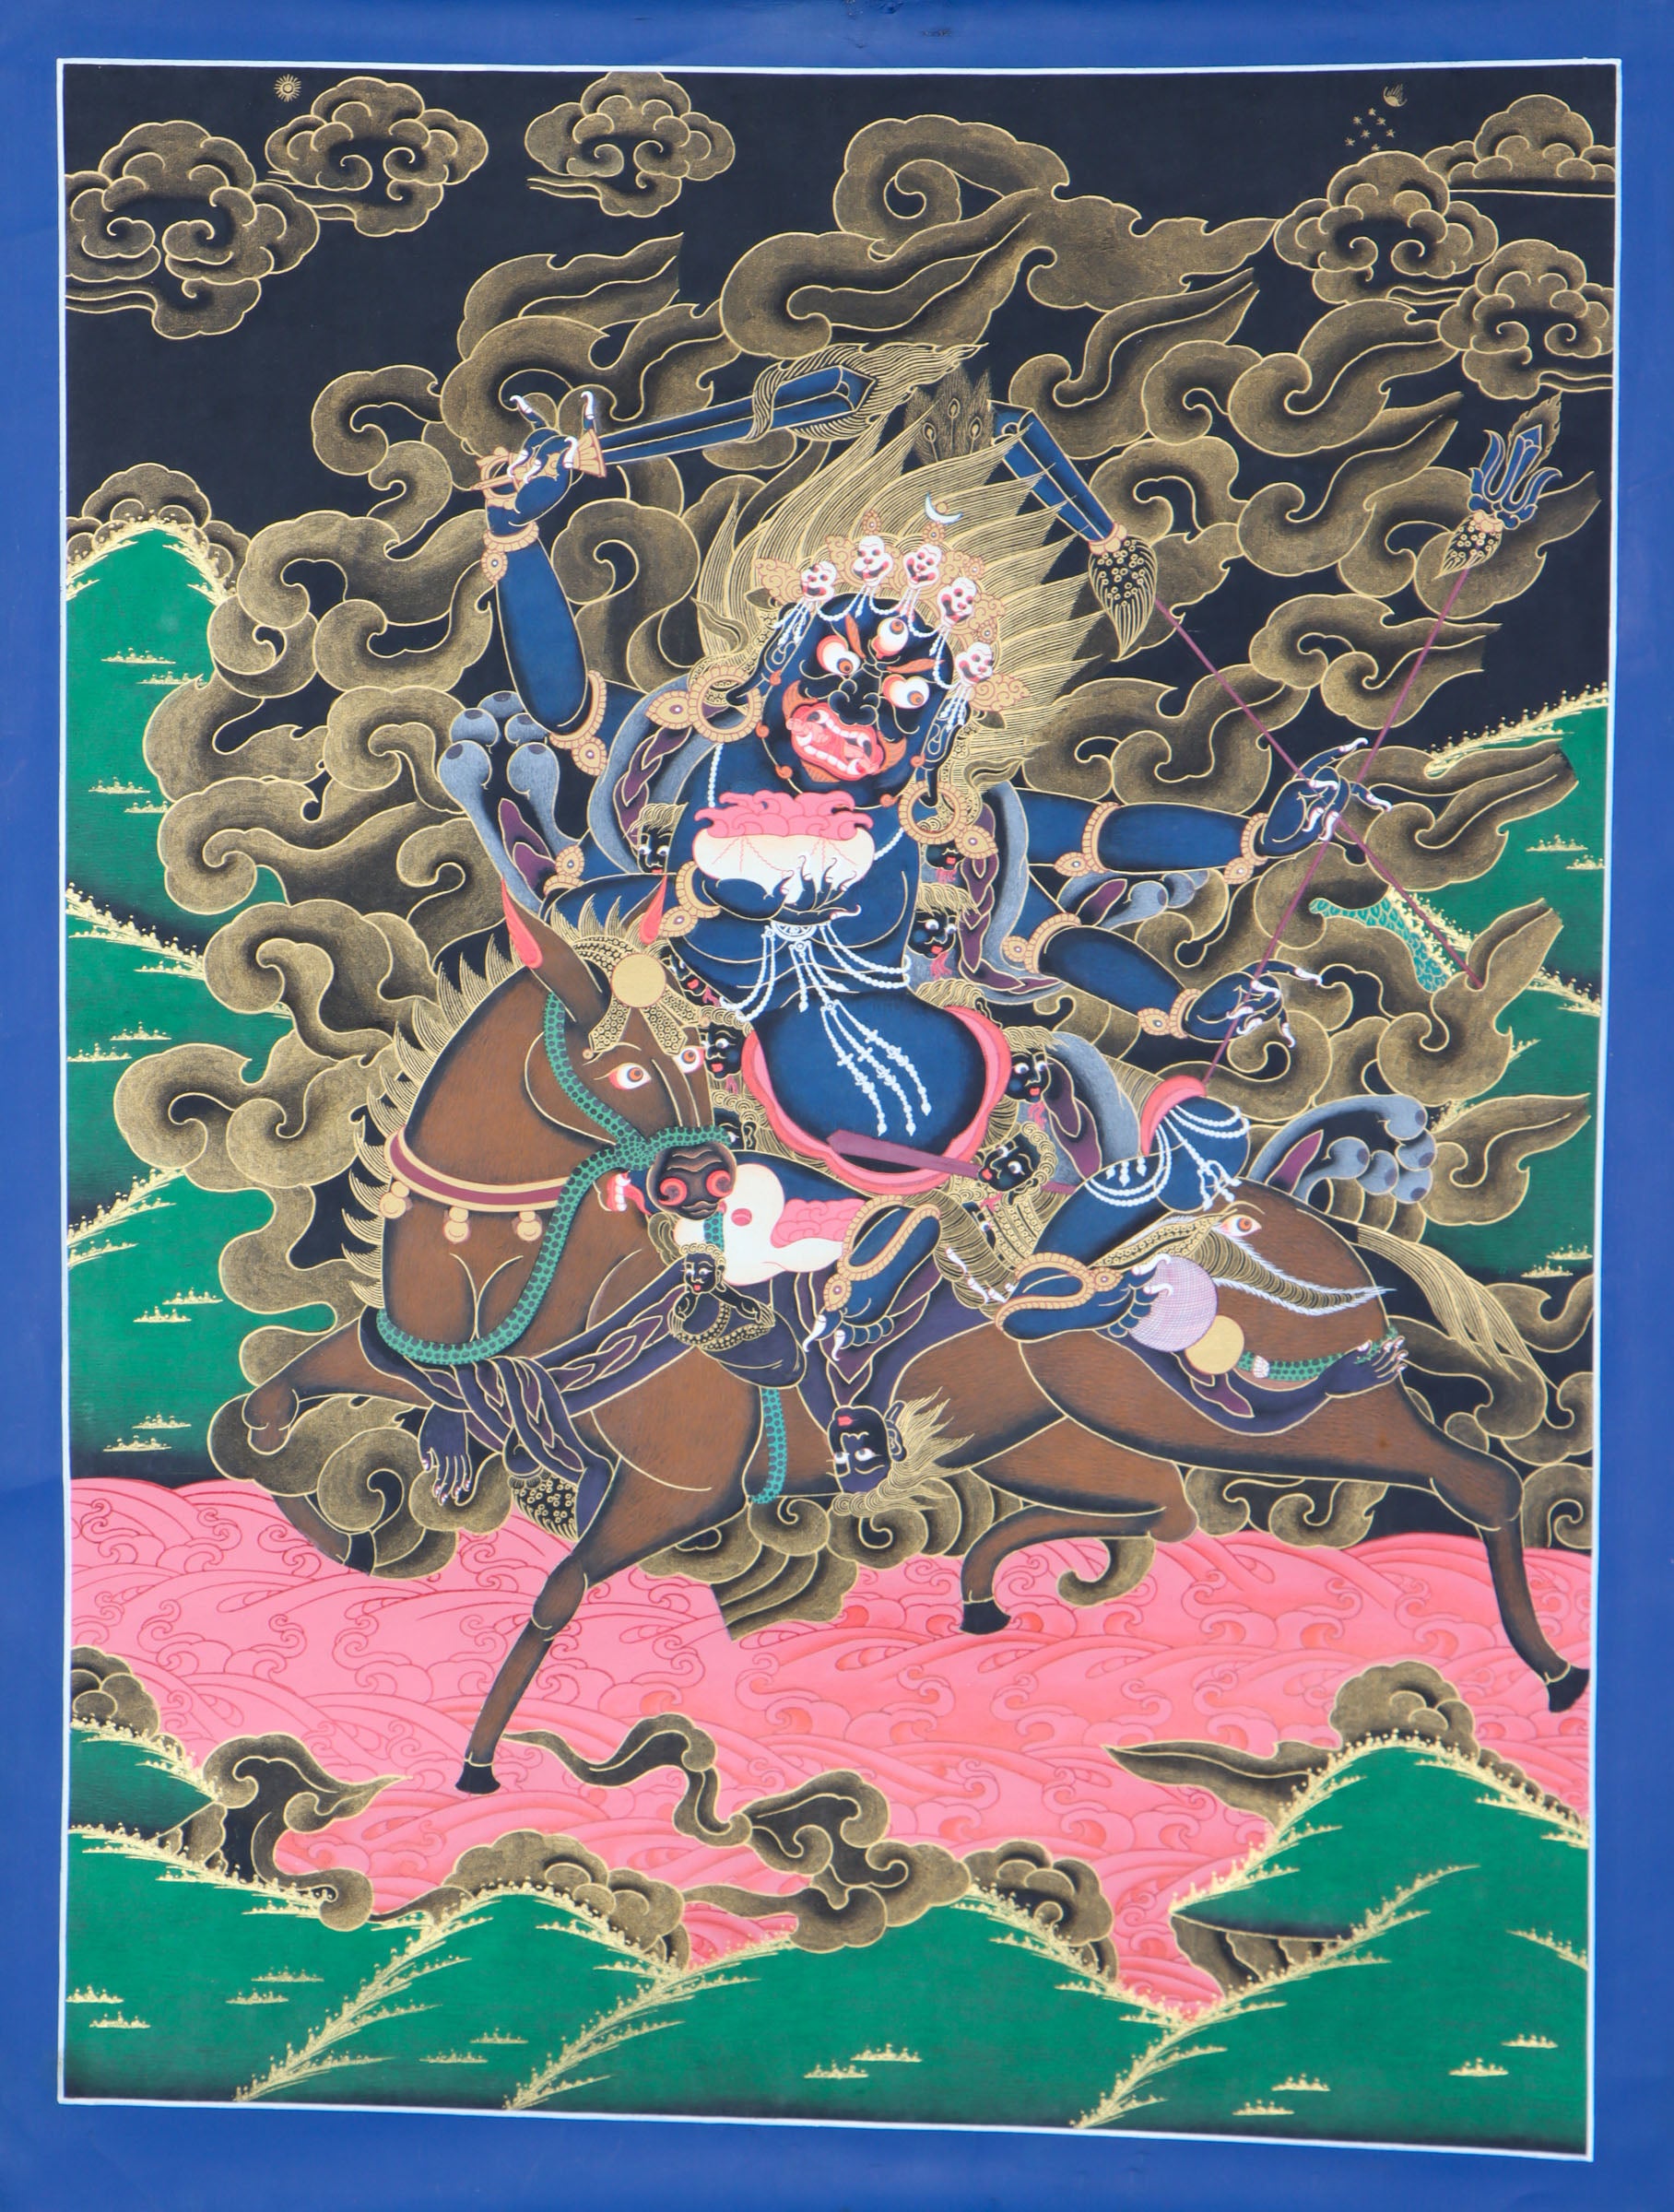 Palden Lhamo Thangka Painting for meditation, devotion, and protection.